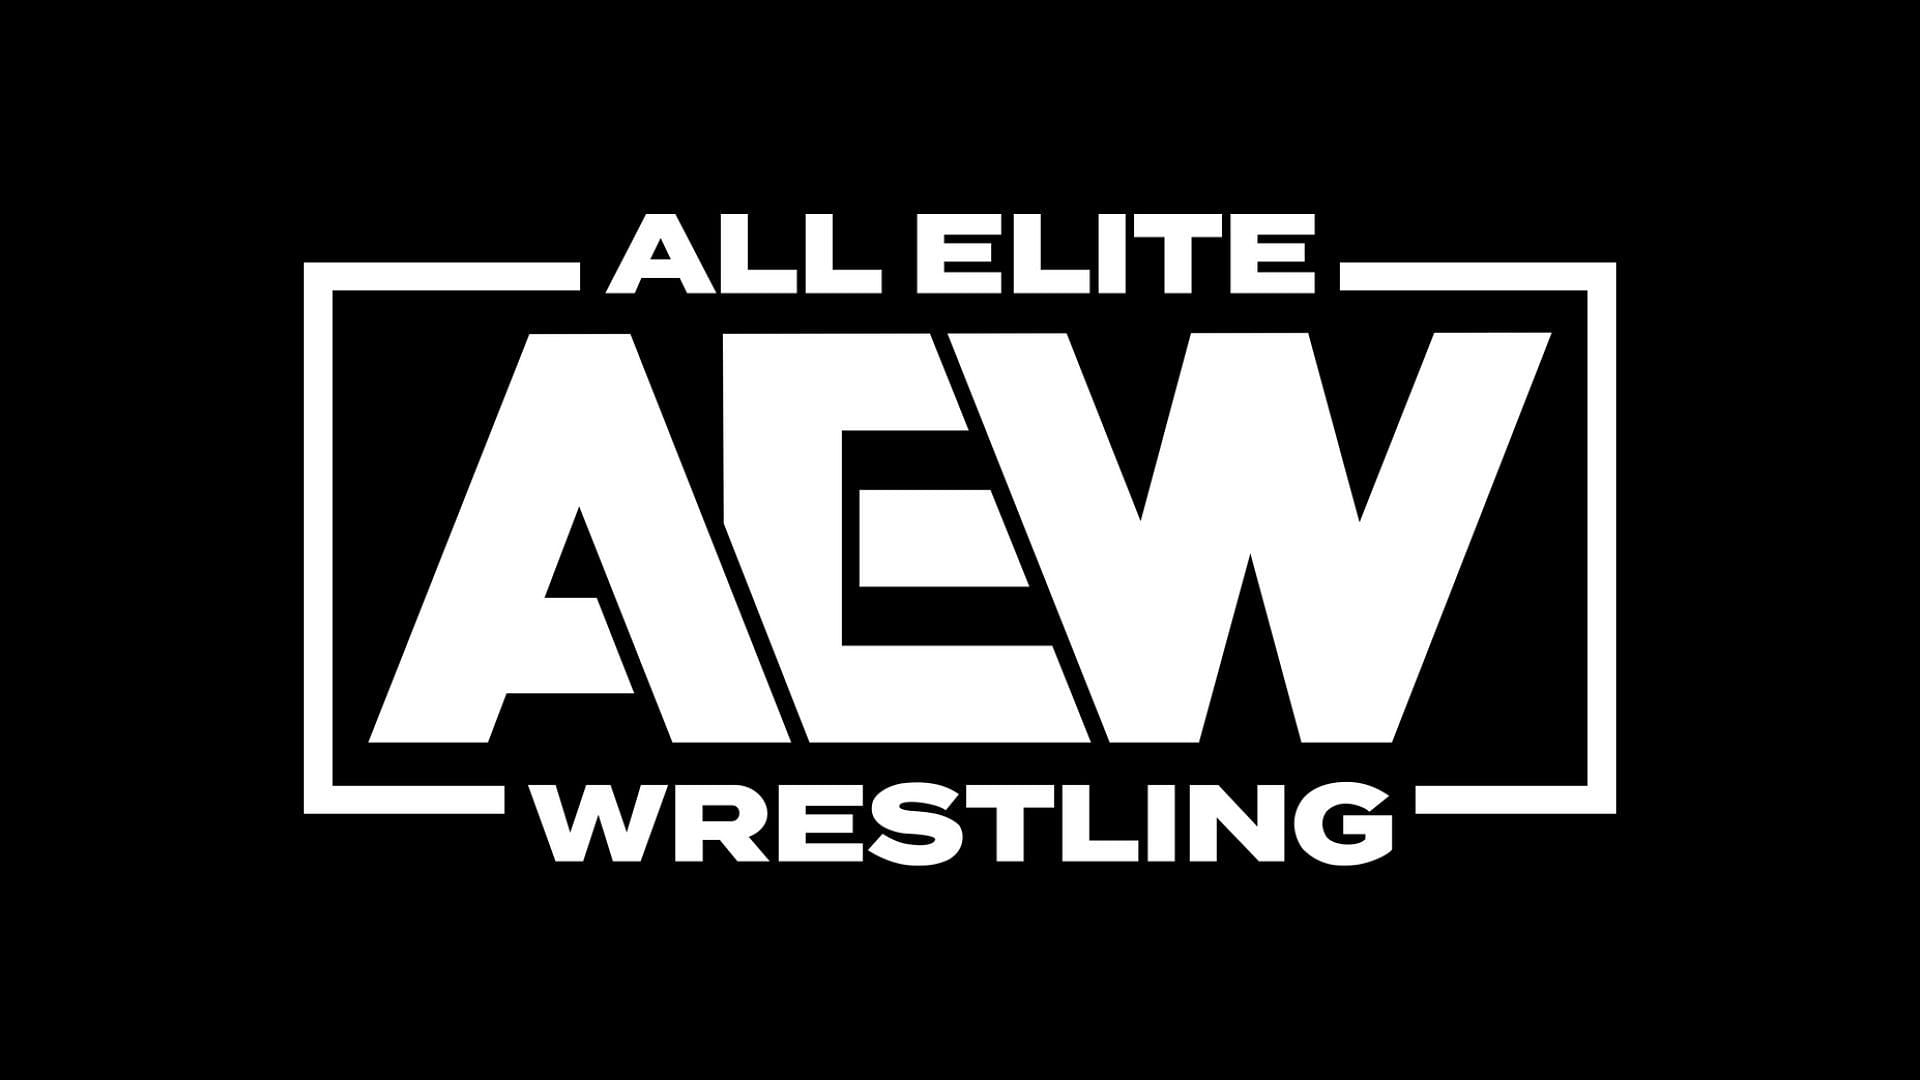 Could this star make his return to AEW soon?